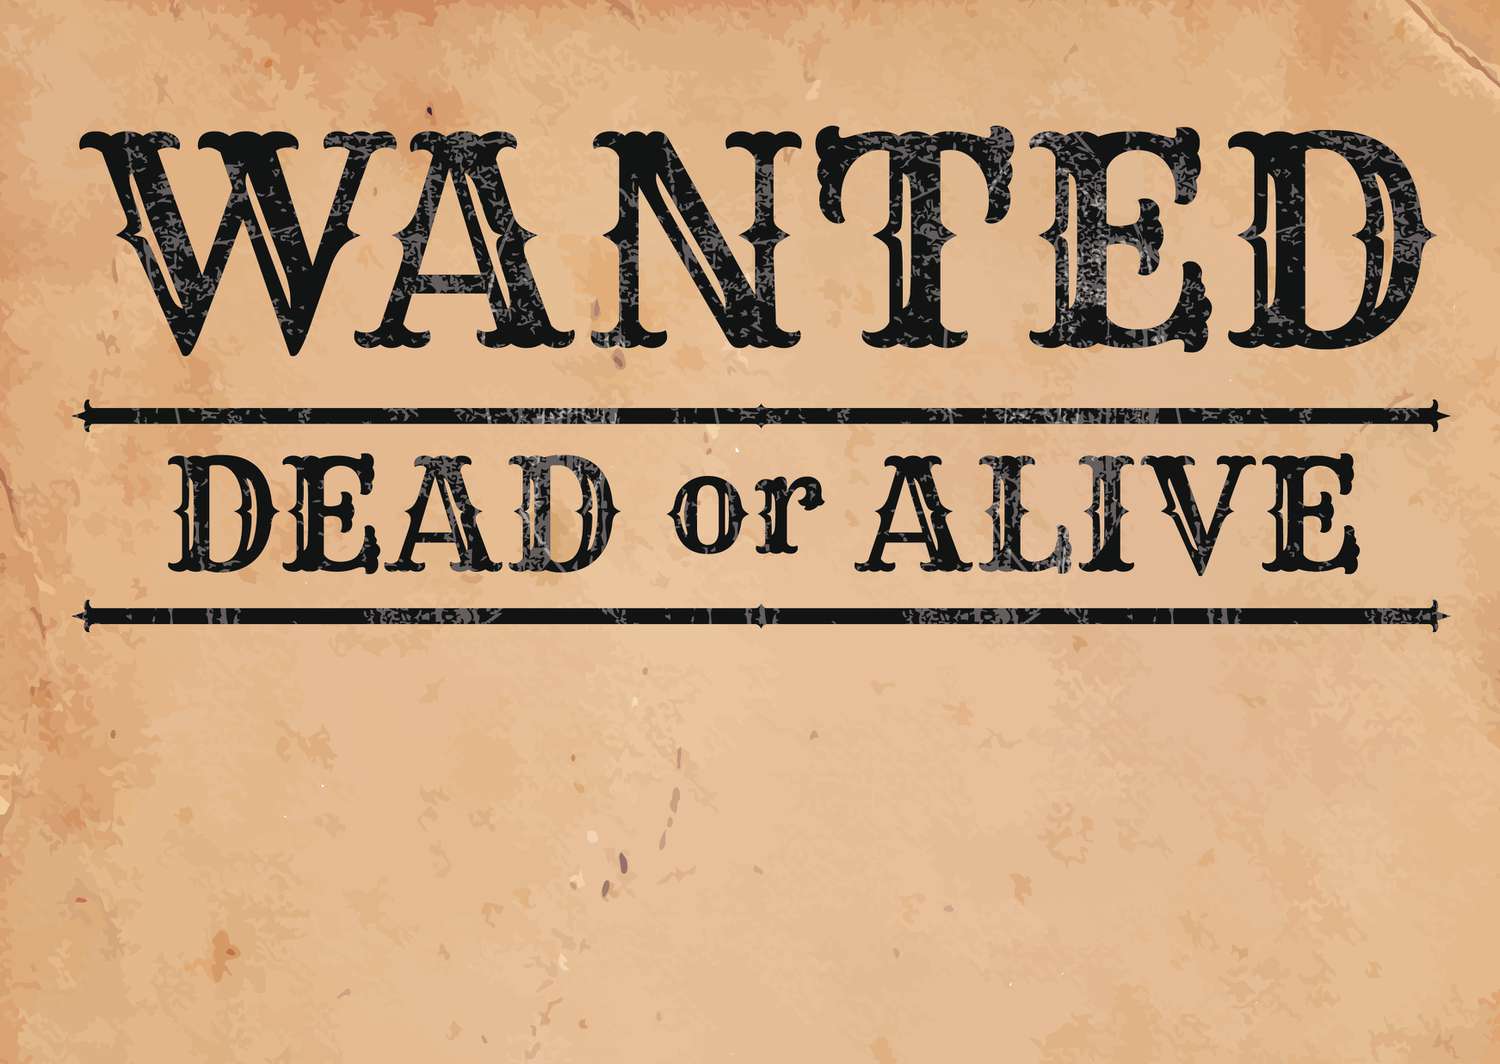 Dead-or-alive